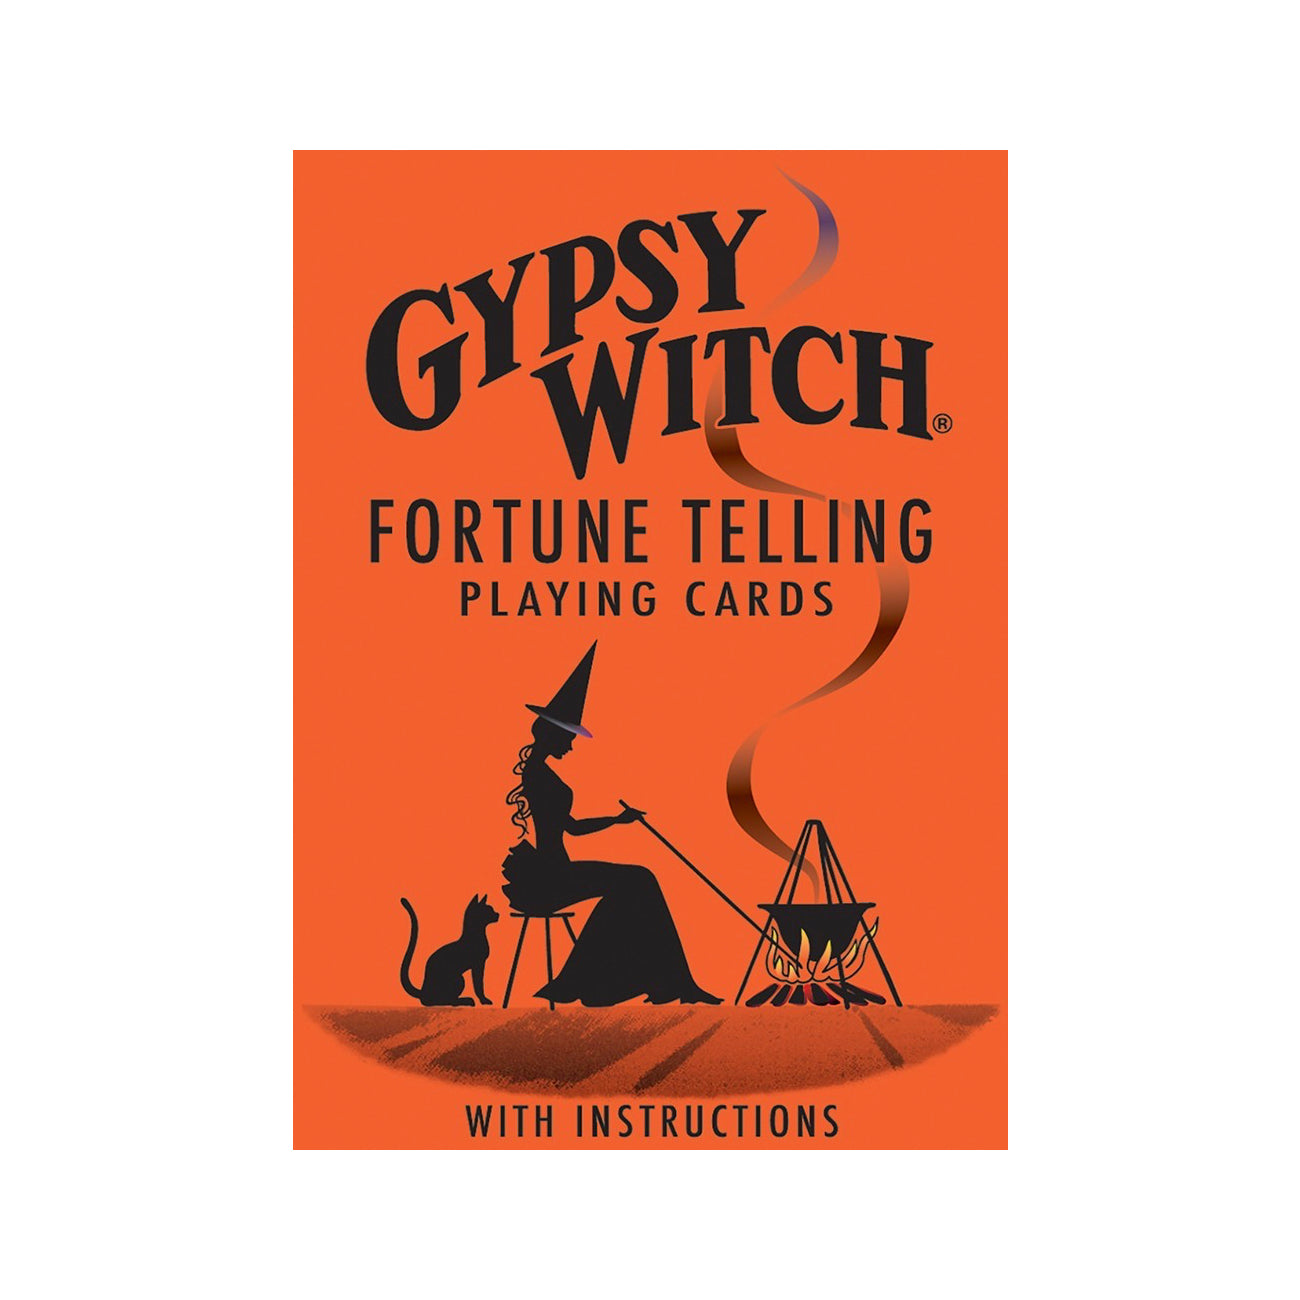 Gypsy Witch Fortune Telling Cards Playing Card Oracle Cartomancy